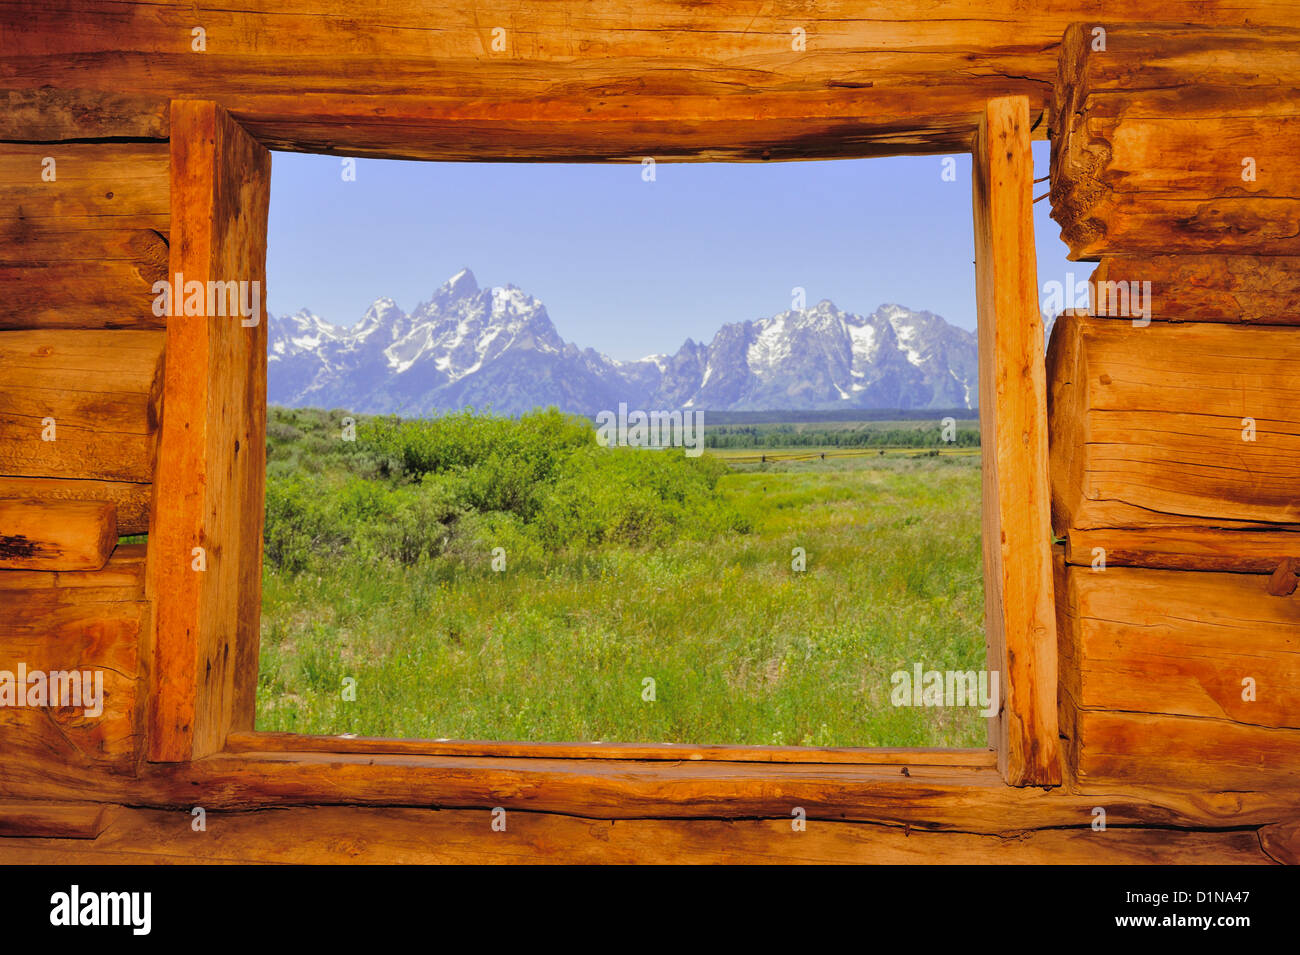 A view of the Grand Tetons mountain range from inside the window of an old log cabin. Stock Photo